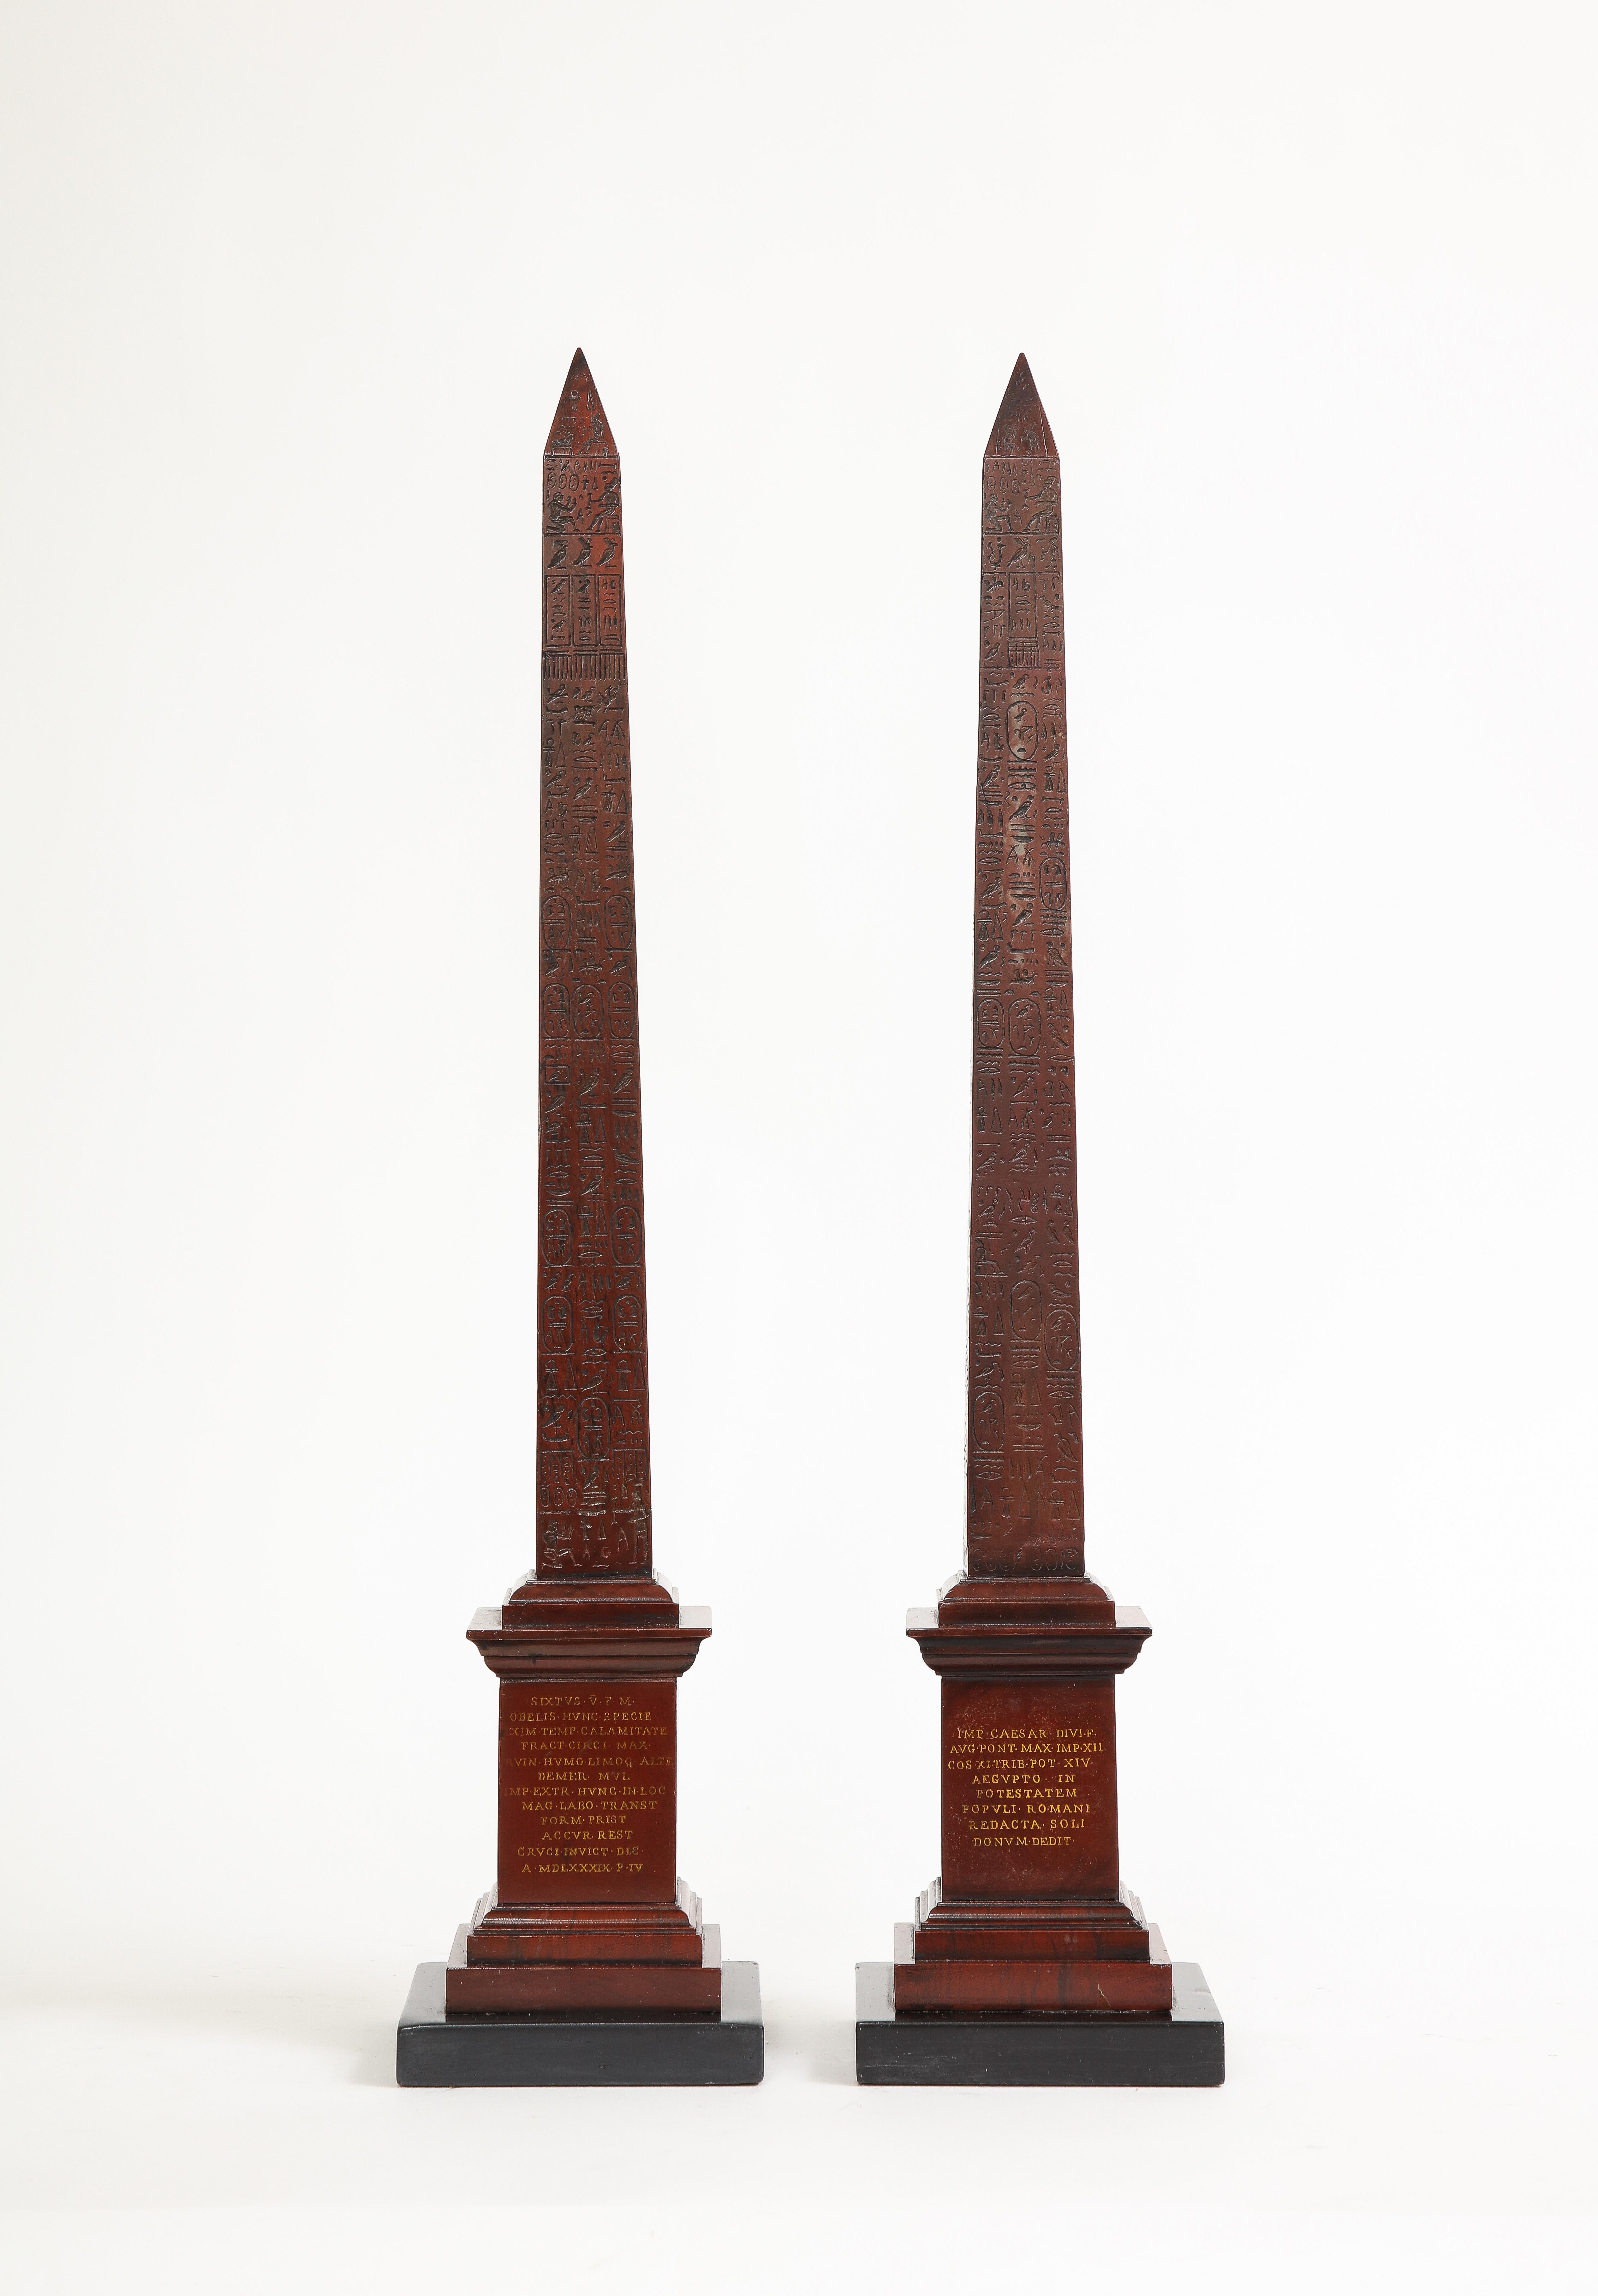 A Marvelous Pair of 19th Century Italian Grand Tour Rouge Marble Obelisks of Montecitorio w/ Hieroglyphics. This magnificent example of the grand tour souvenirs that were popular in the 19th century are very rare to find in this size, quality,